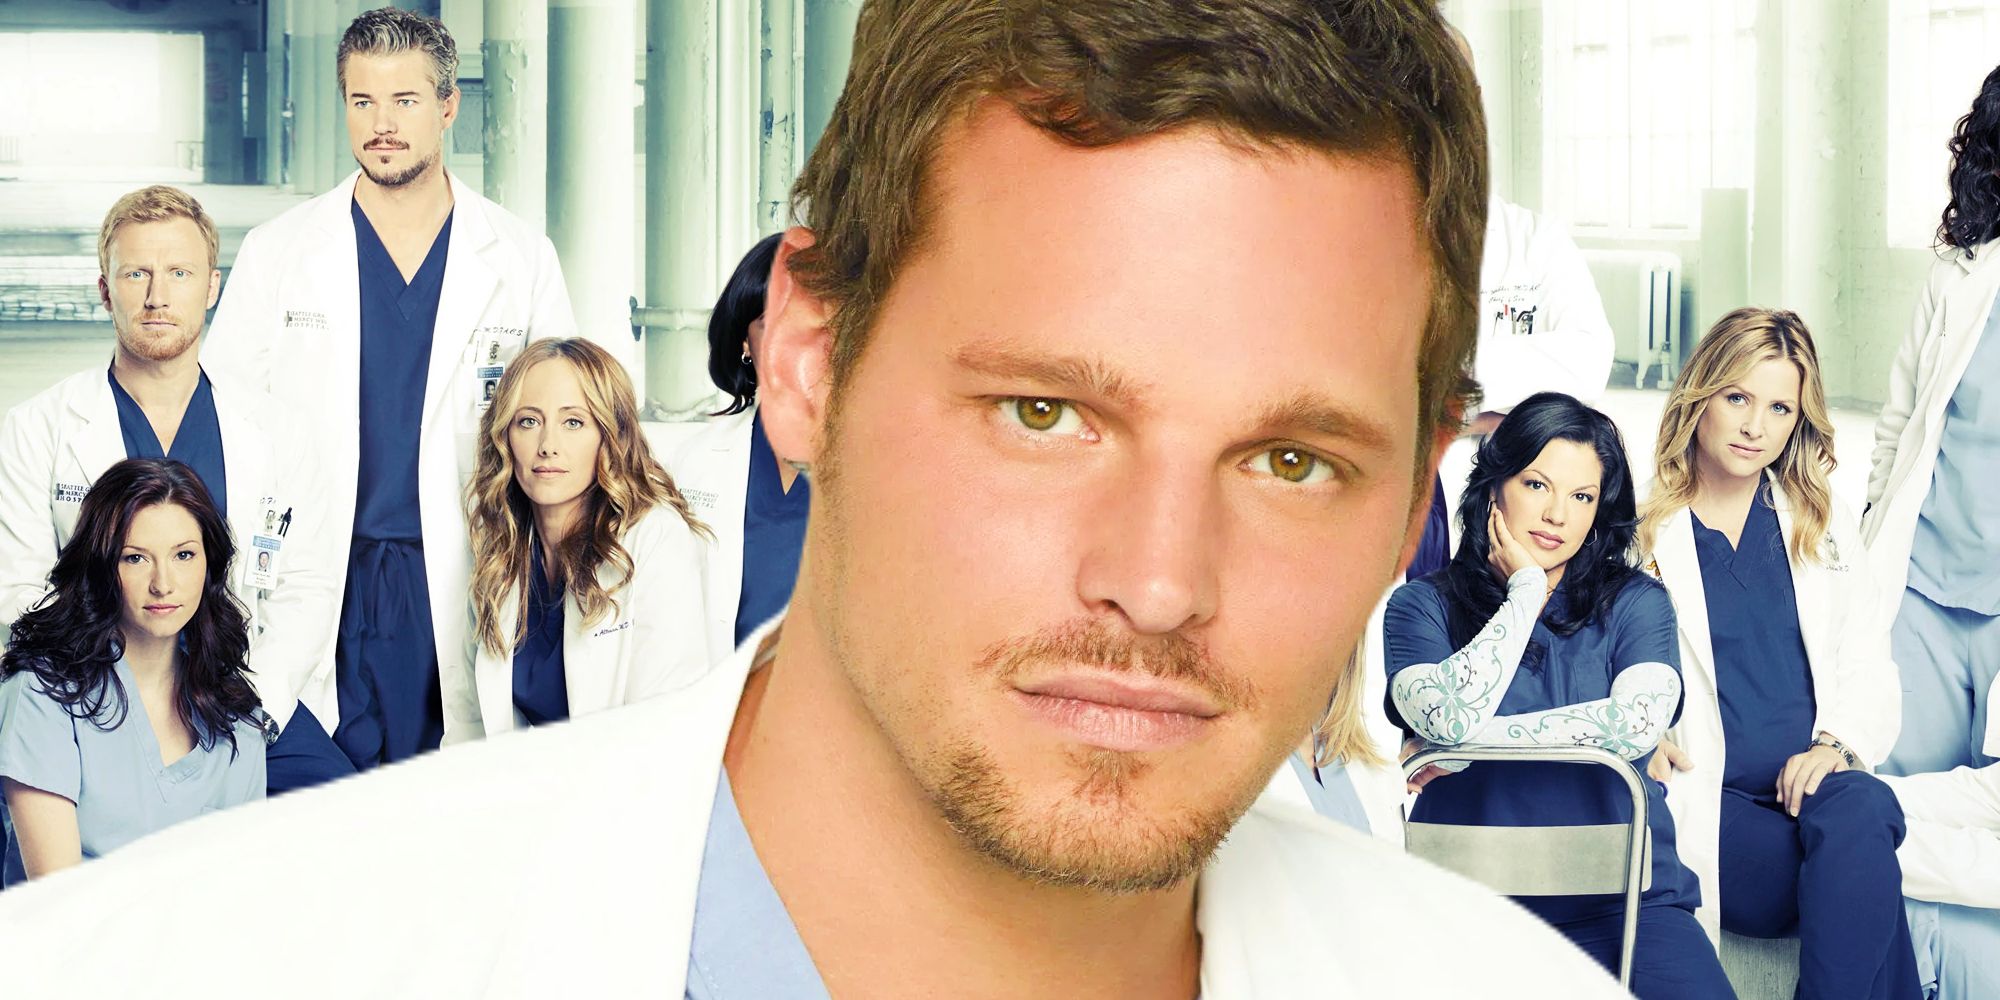 Alex Karev (Justin Chambers) and the cast of Grey's Anatomy